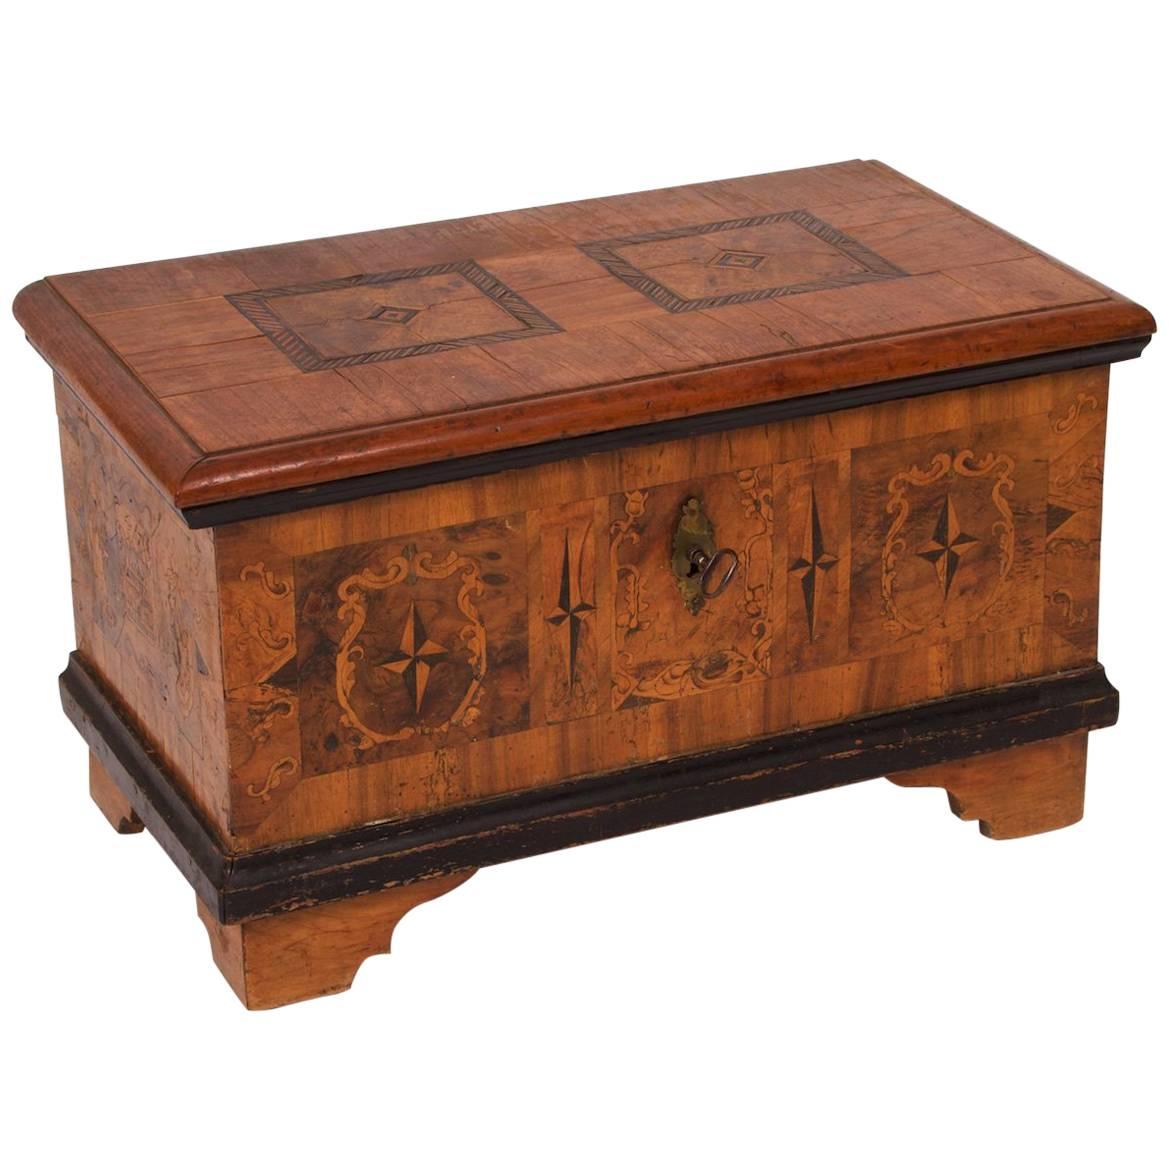 17th Century Casket with Hidden Compartments For Sale